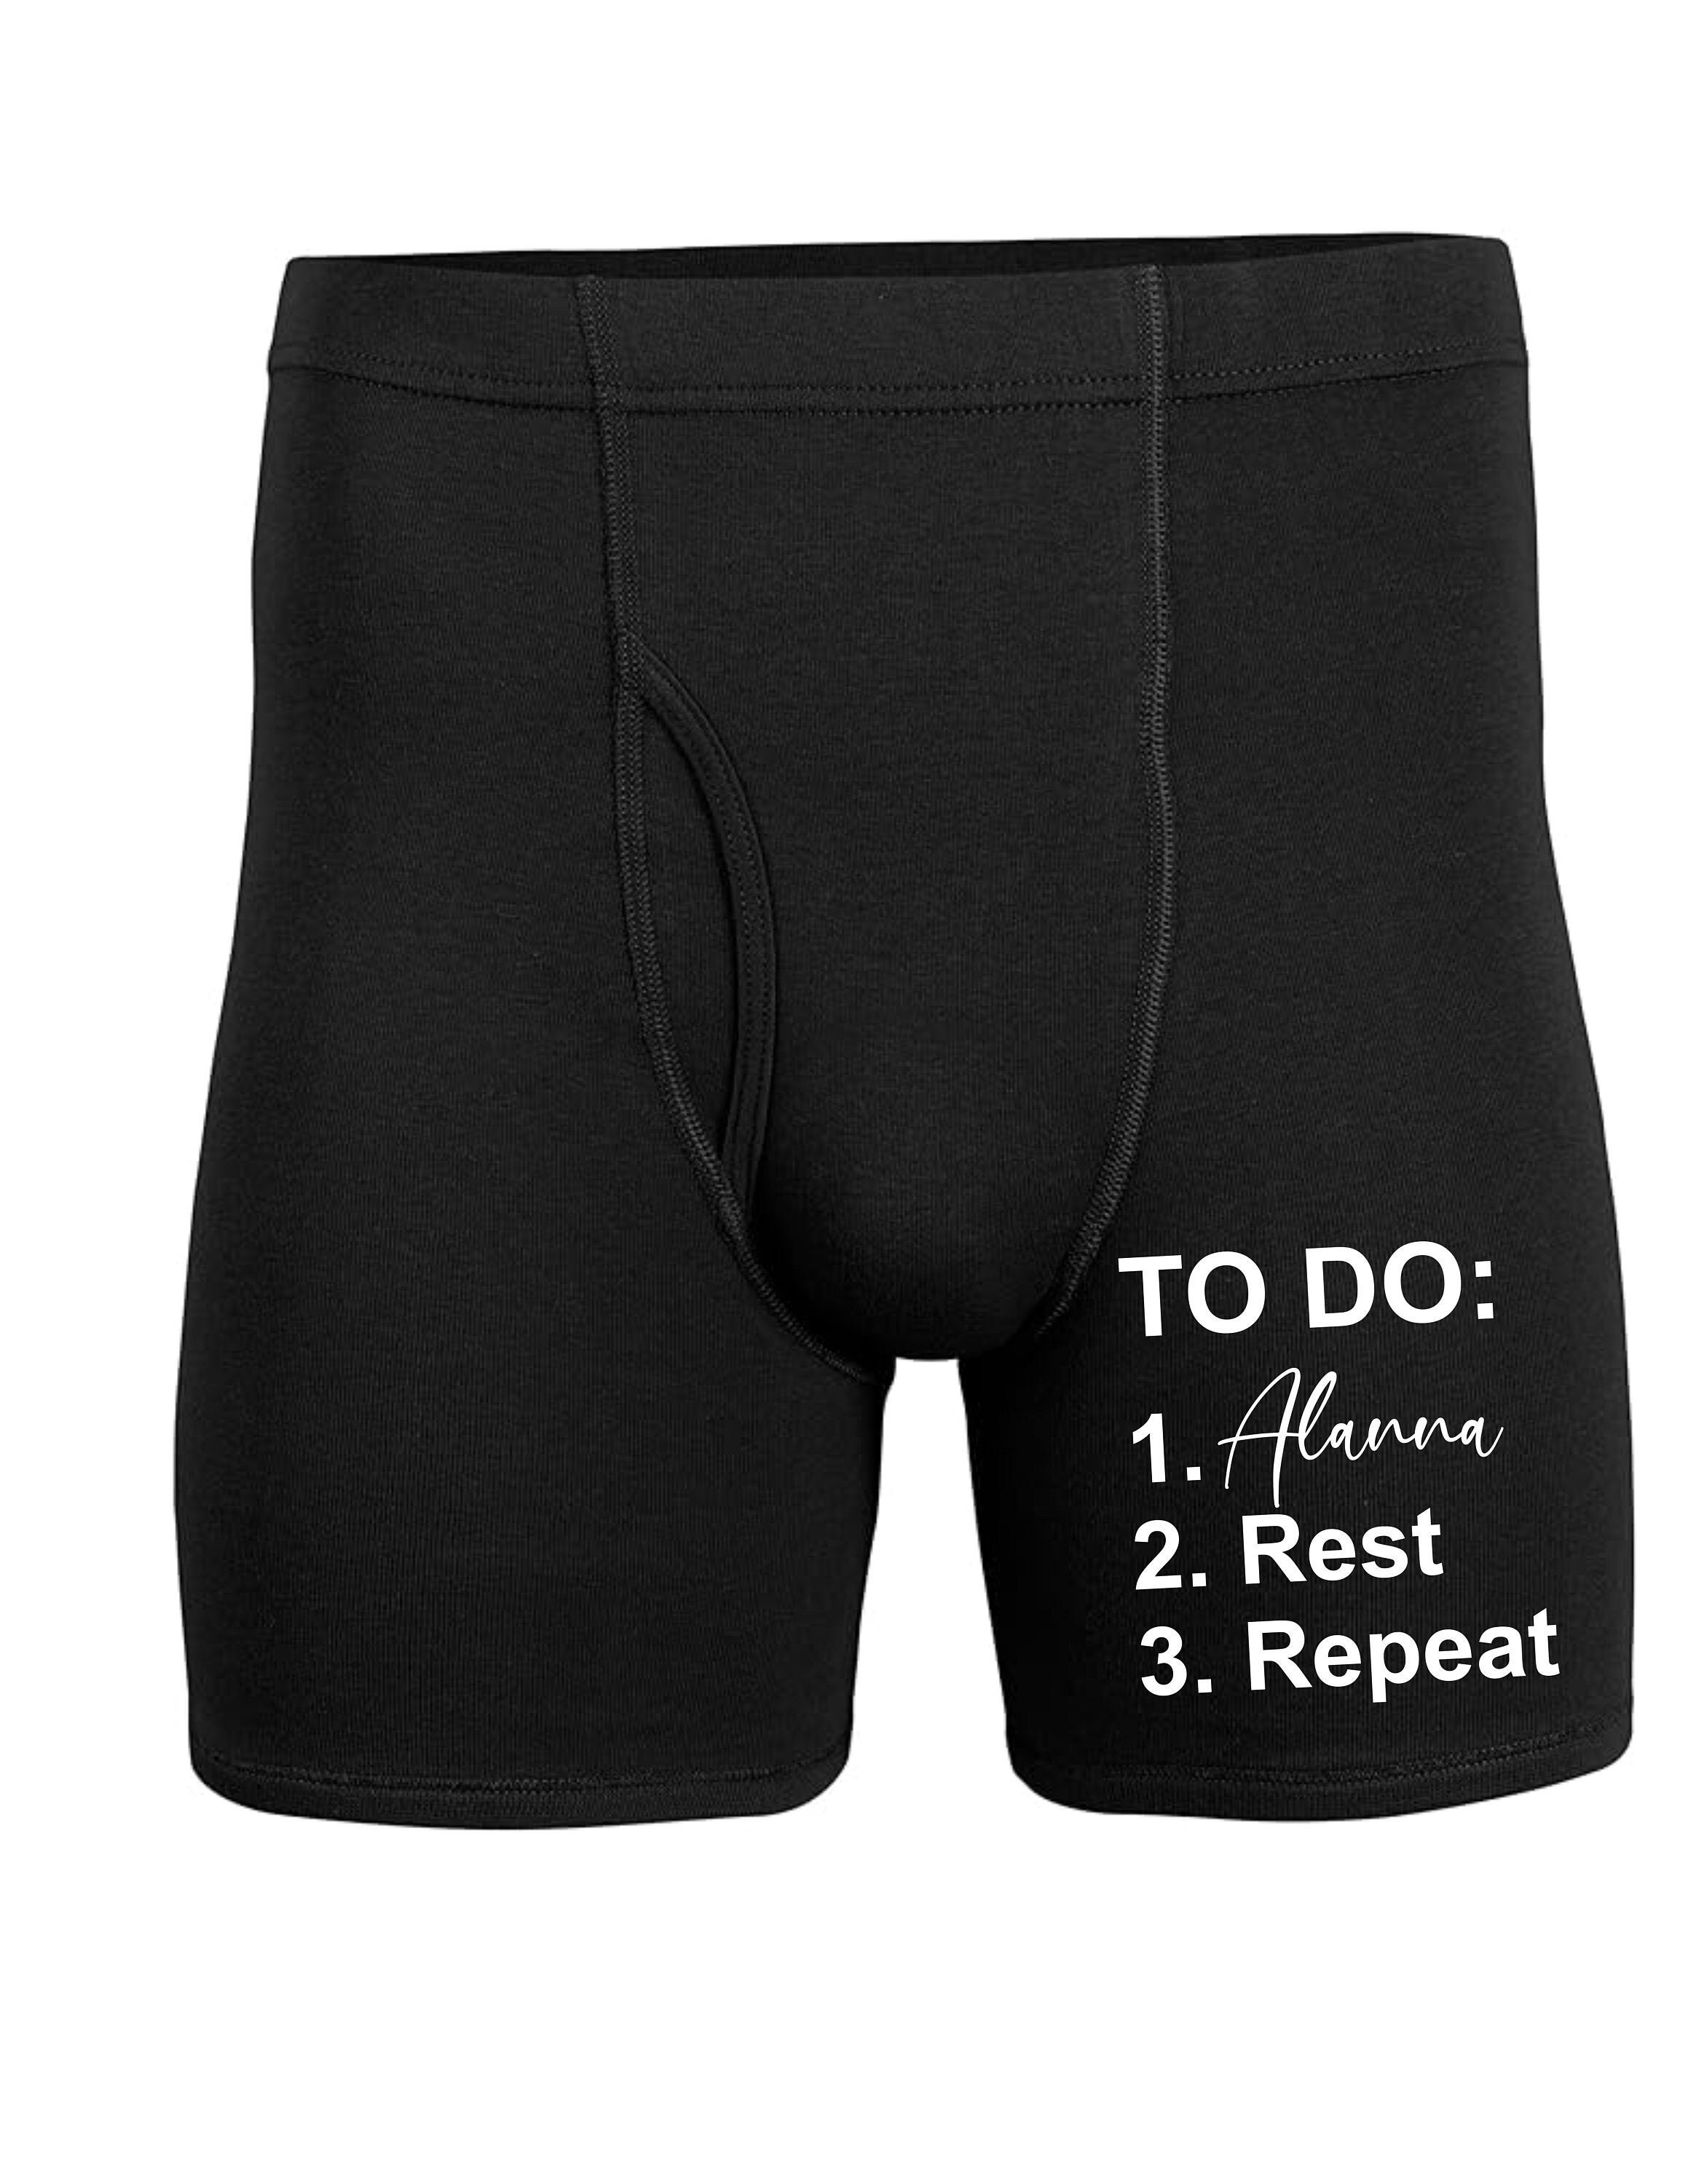 Funny Men's Boxer Briefs. the Man, the Legend Boxers, Gift for Him. Sexy  Men's Boxers, Novelty Gift for Him, Funny Men's Underwear, -  Denmark